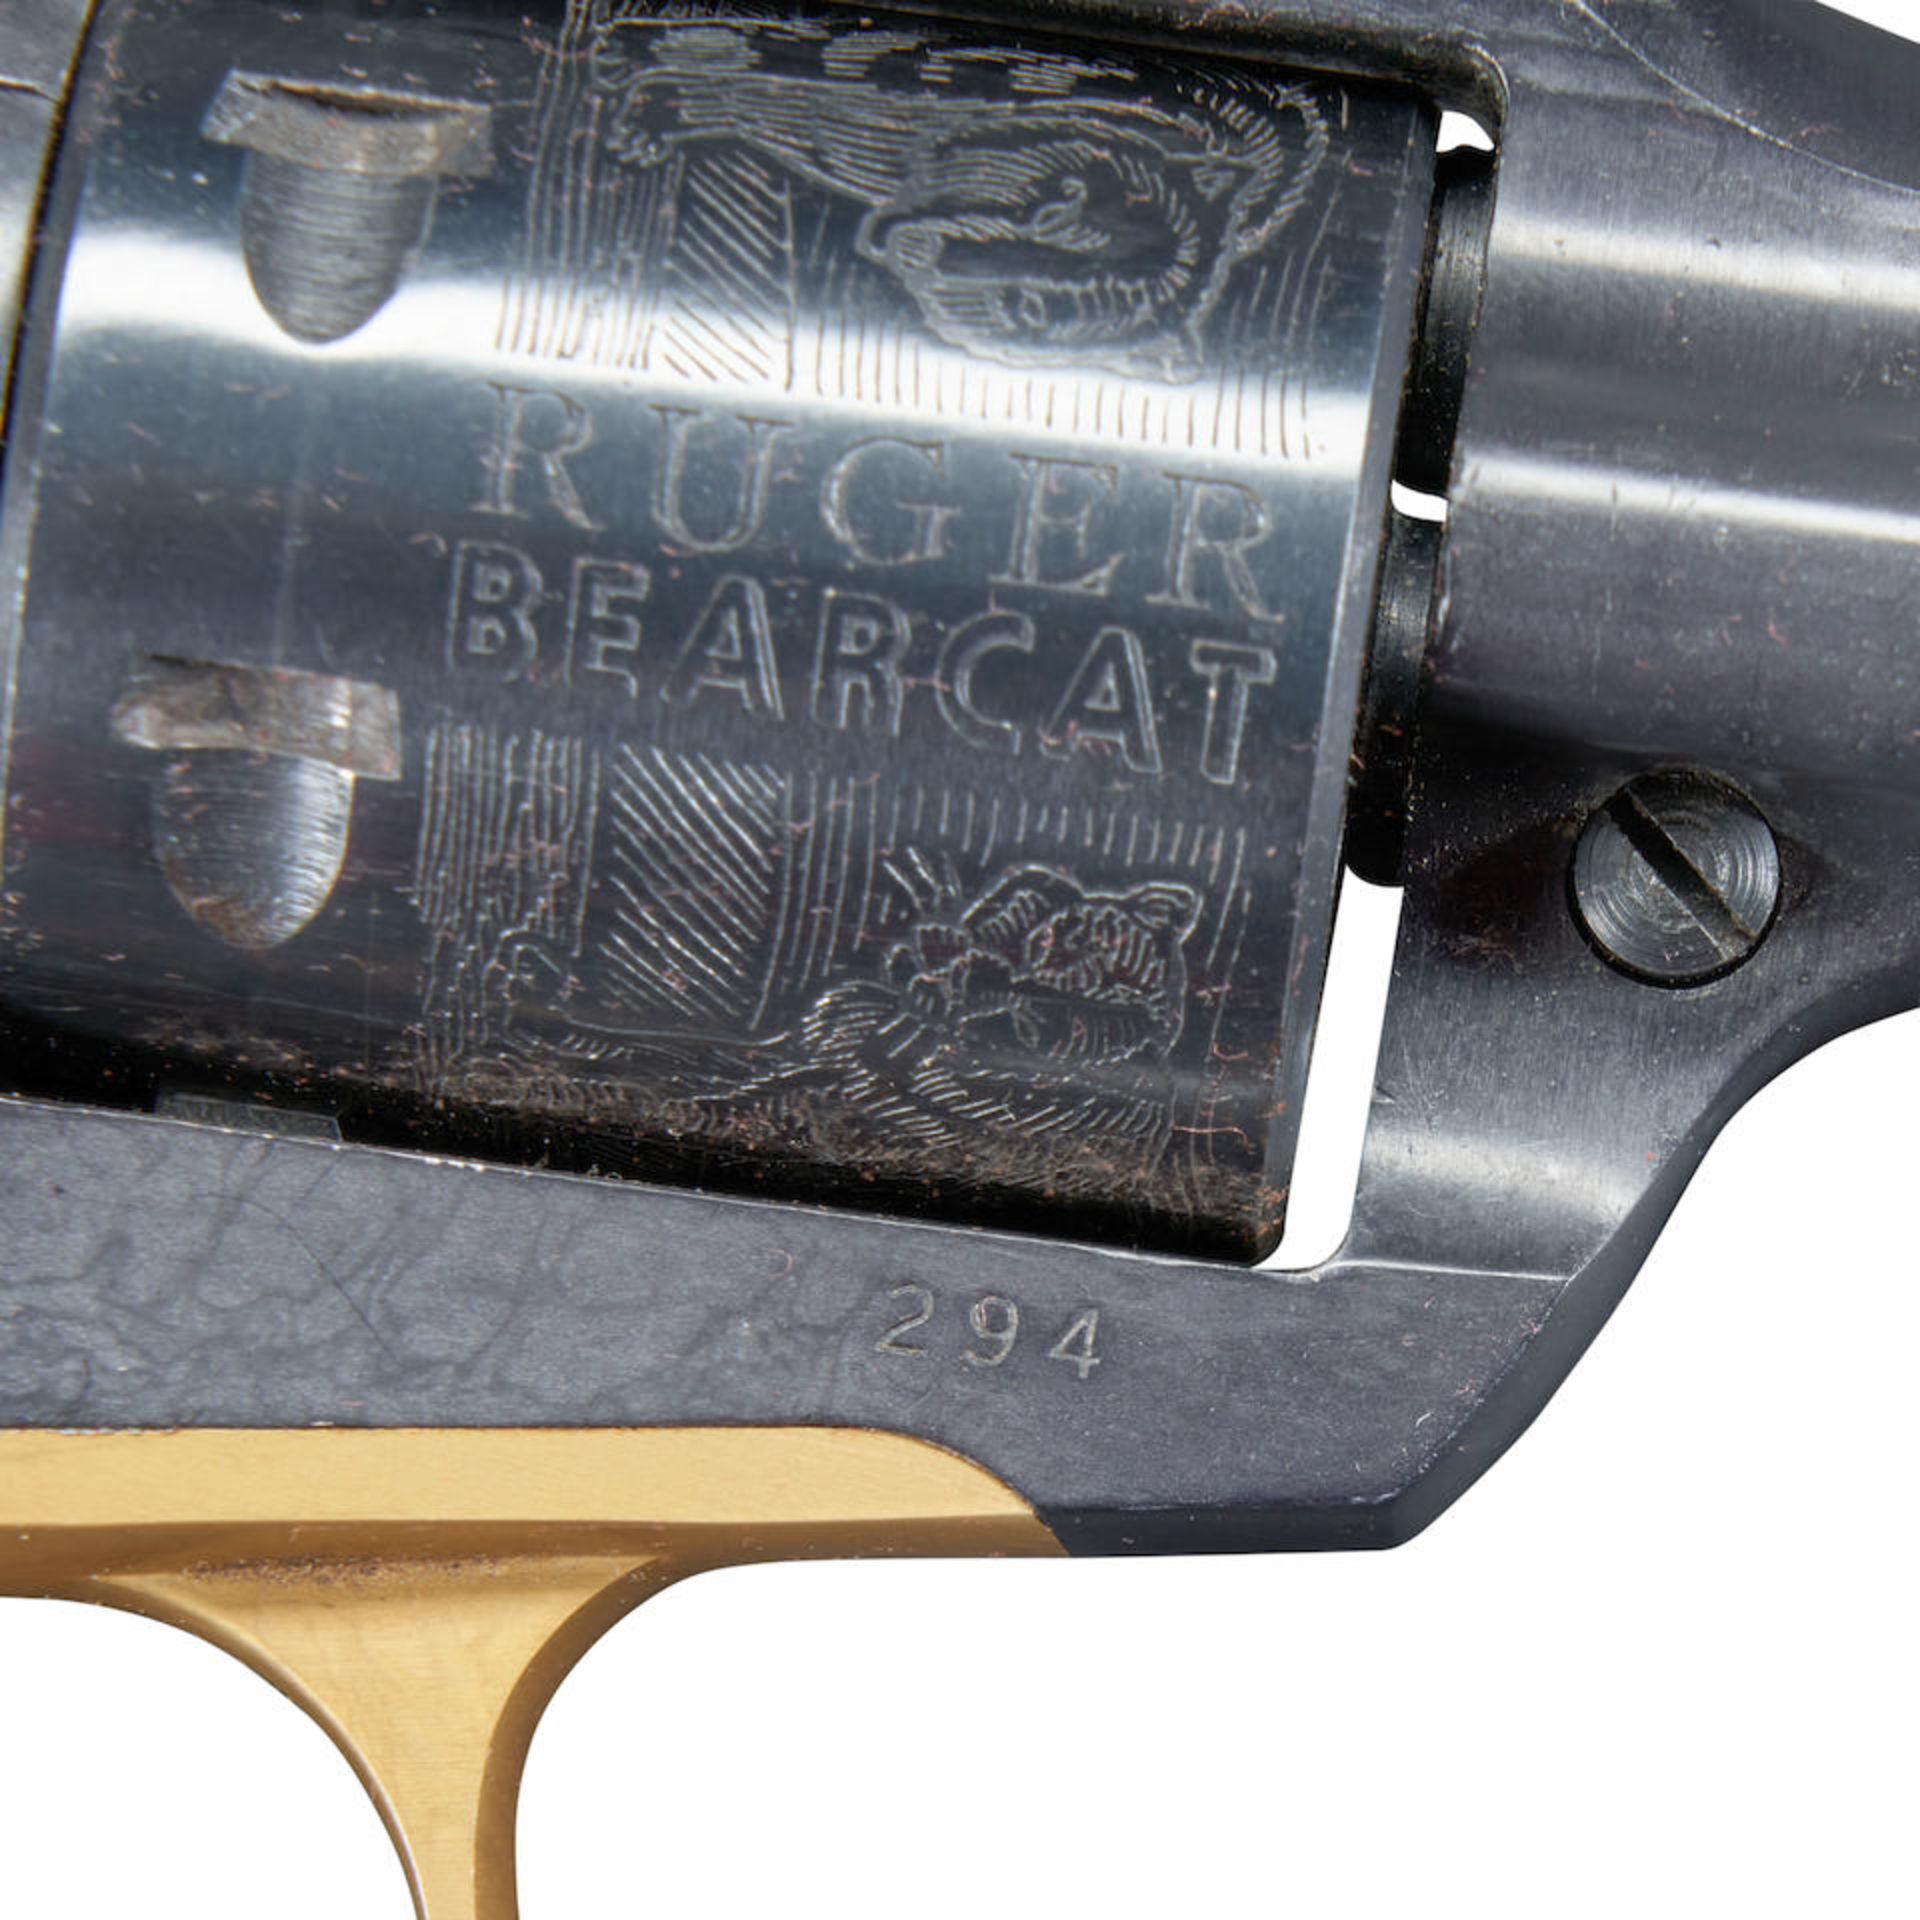 Ruger Bearcat Three-Digit Serial Number Single Action Revolver, Curio or Relic firearm - Bild 3 aus 5